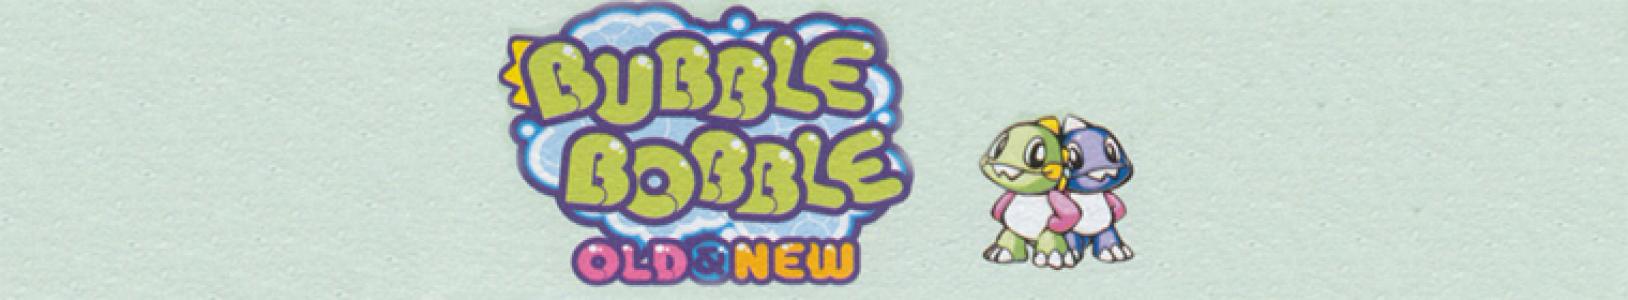 bubble bobble: old and new